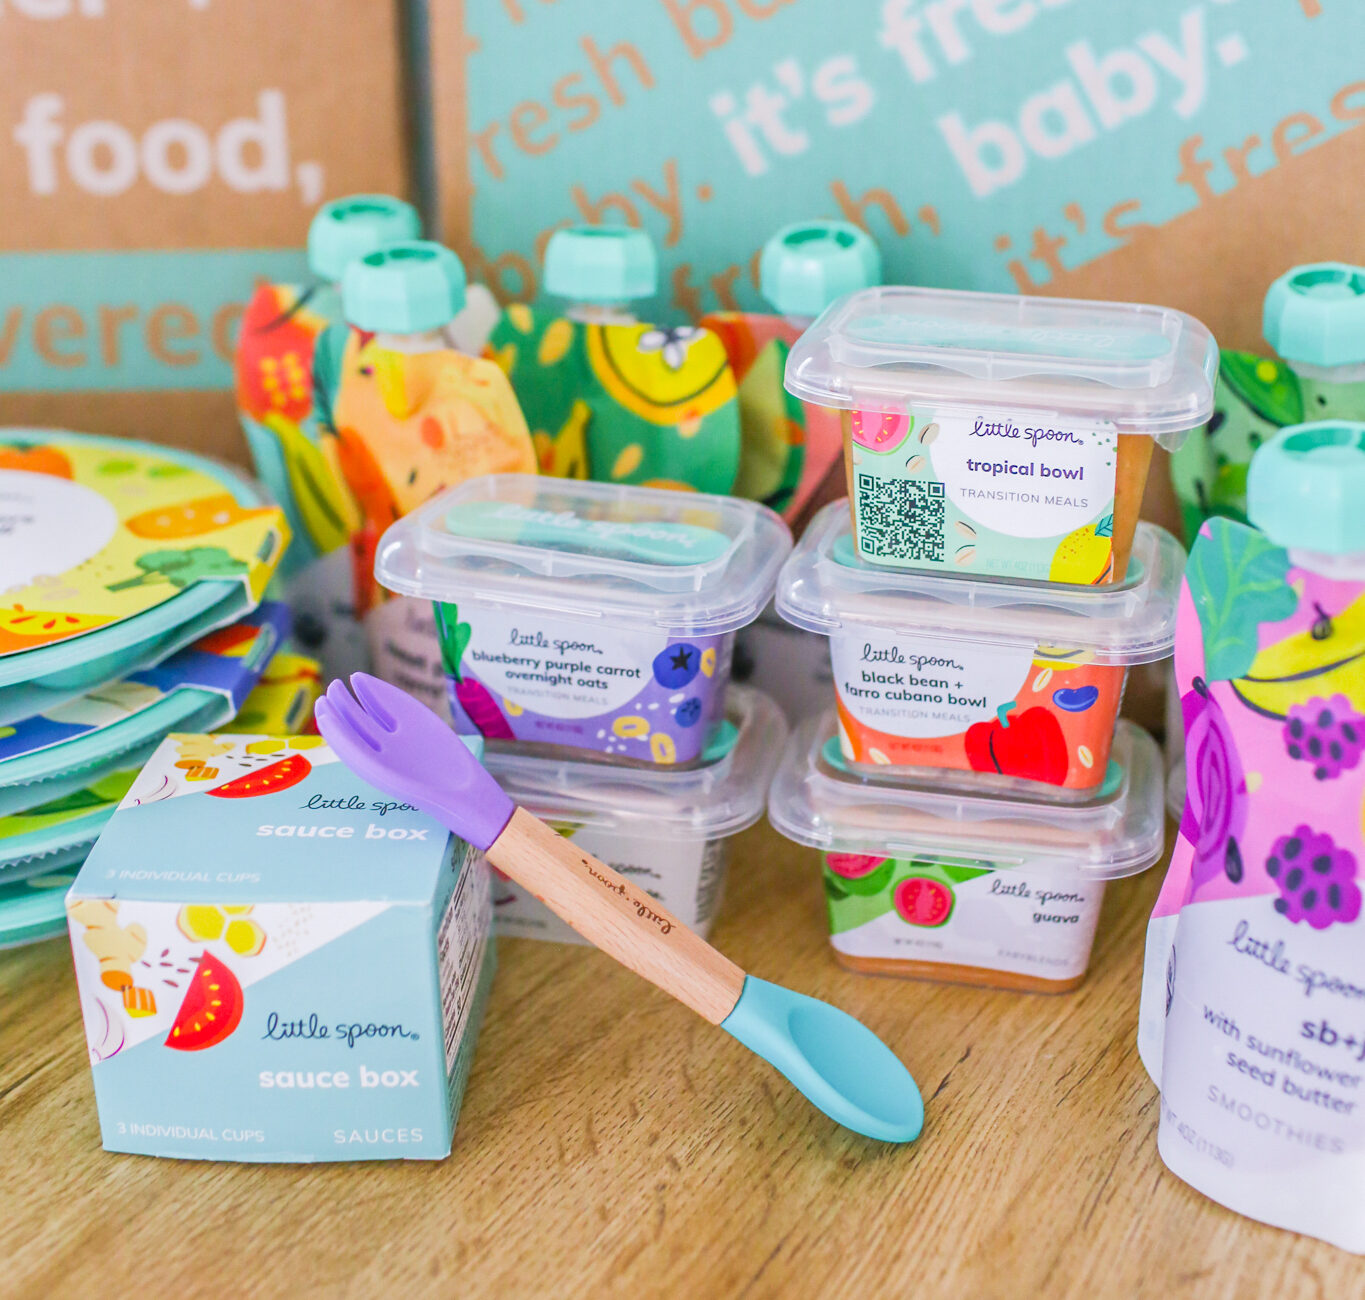 10 Best Selling Little Spoon Baby Foods for 2023 - The Jerusalem Post